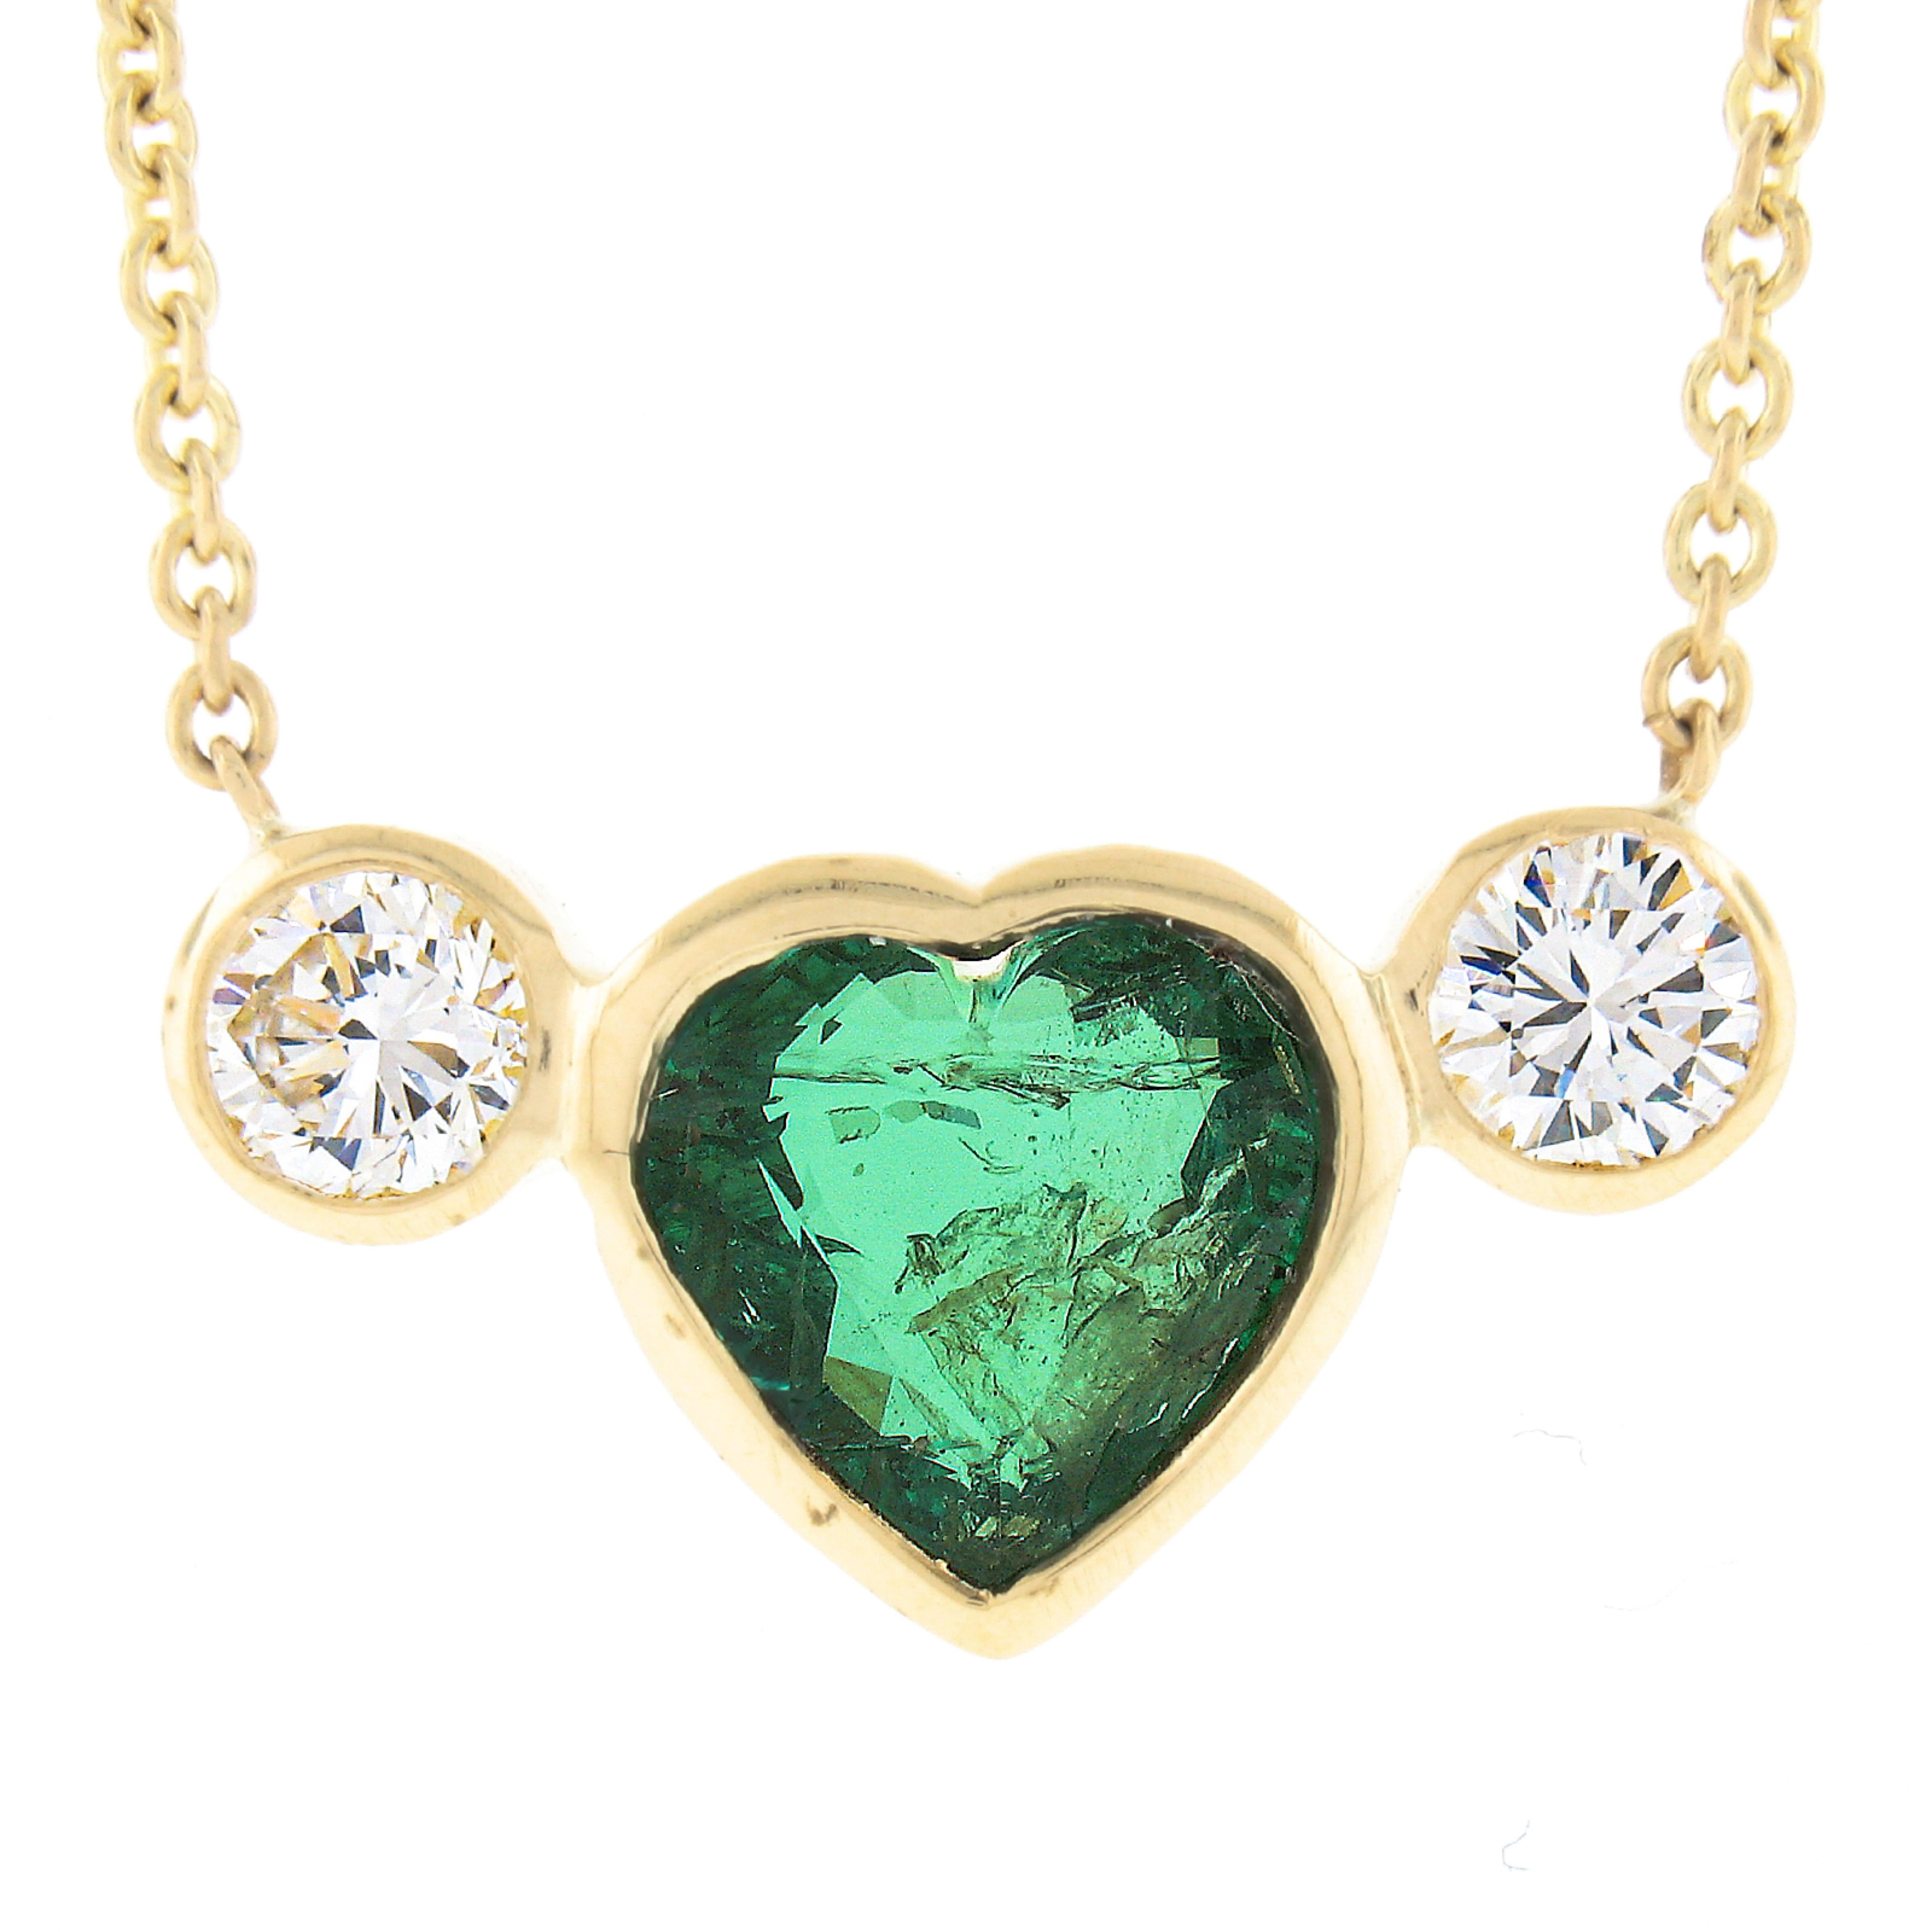 This stunning emerald and diamond pendant is newly crafted in solid 18k yellow gold and features a gorgeous, GIA certified, heart cut genuine emerald stone neatly bezel set at the center heart shaped bezel setting weighing exactly 1.92 carats. This